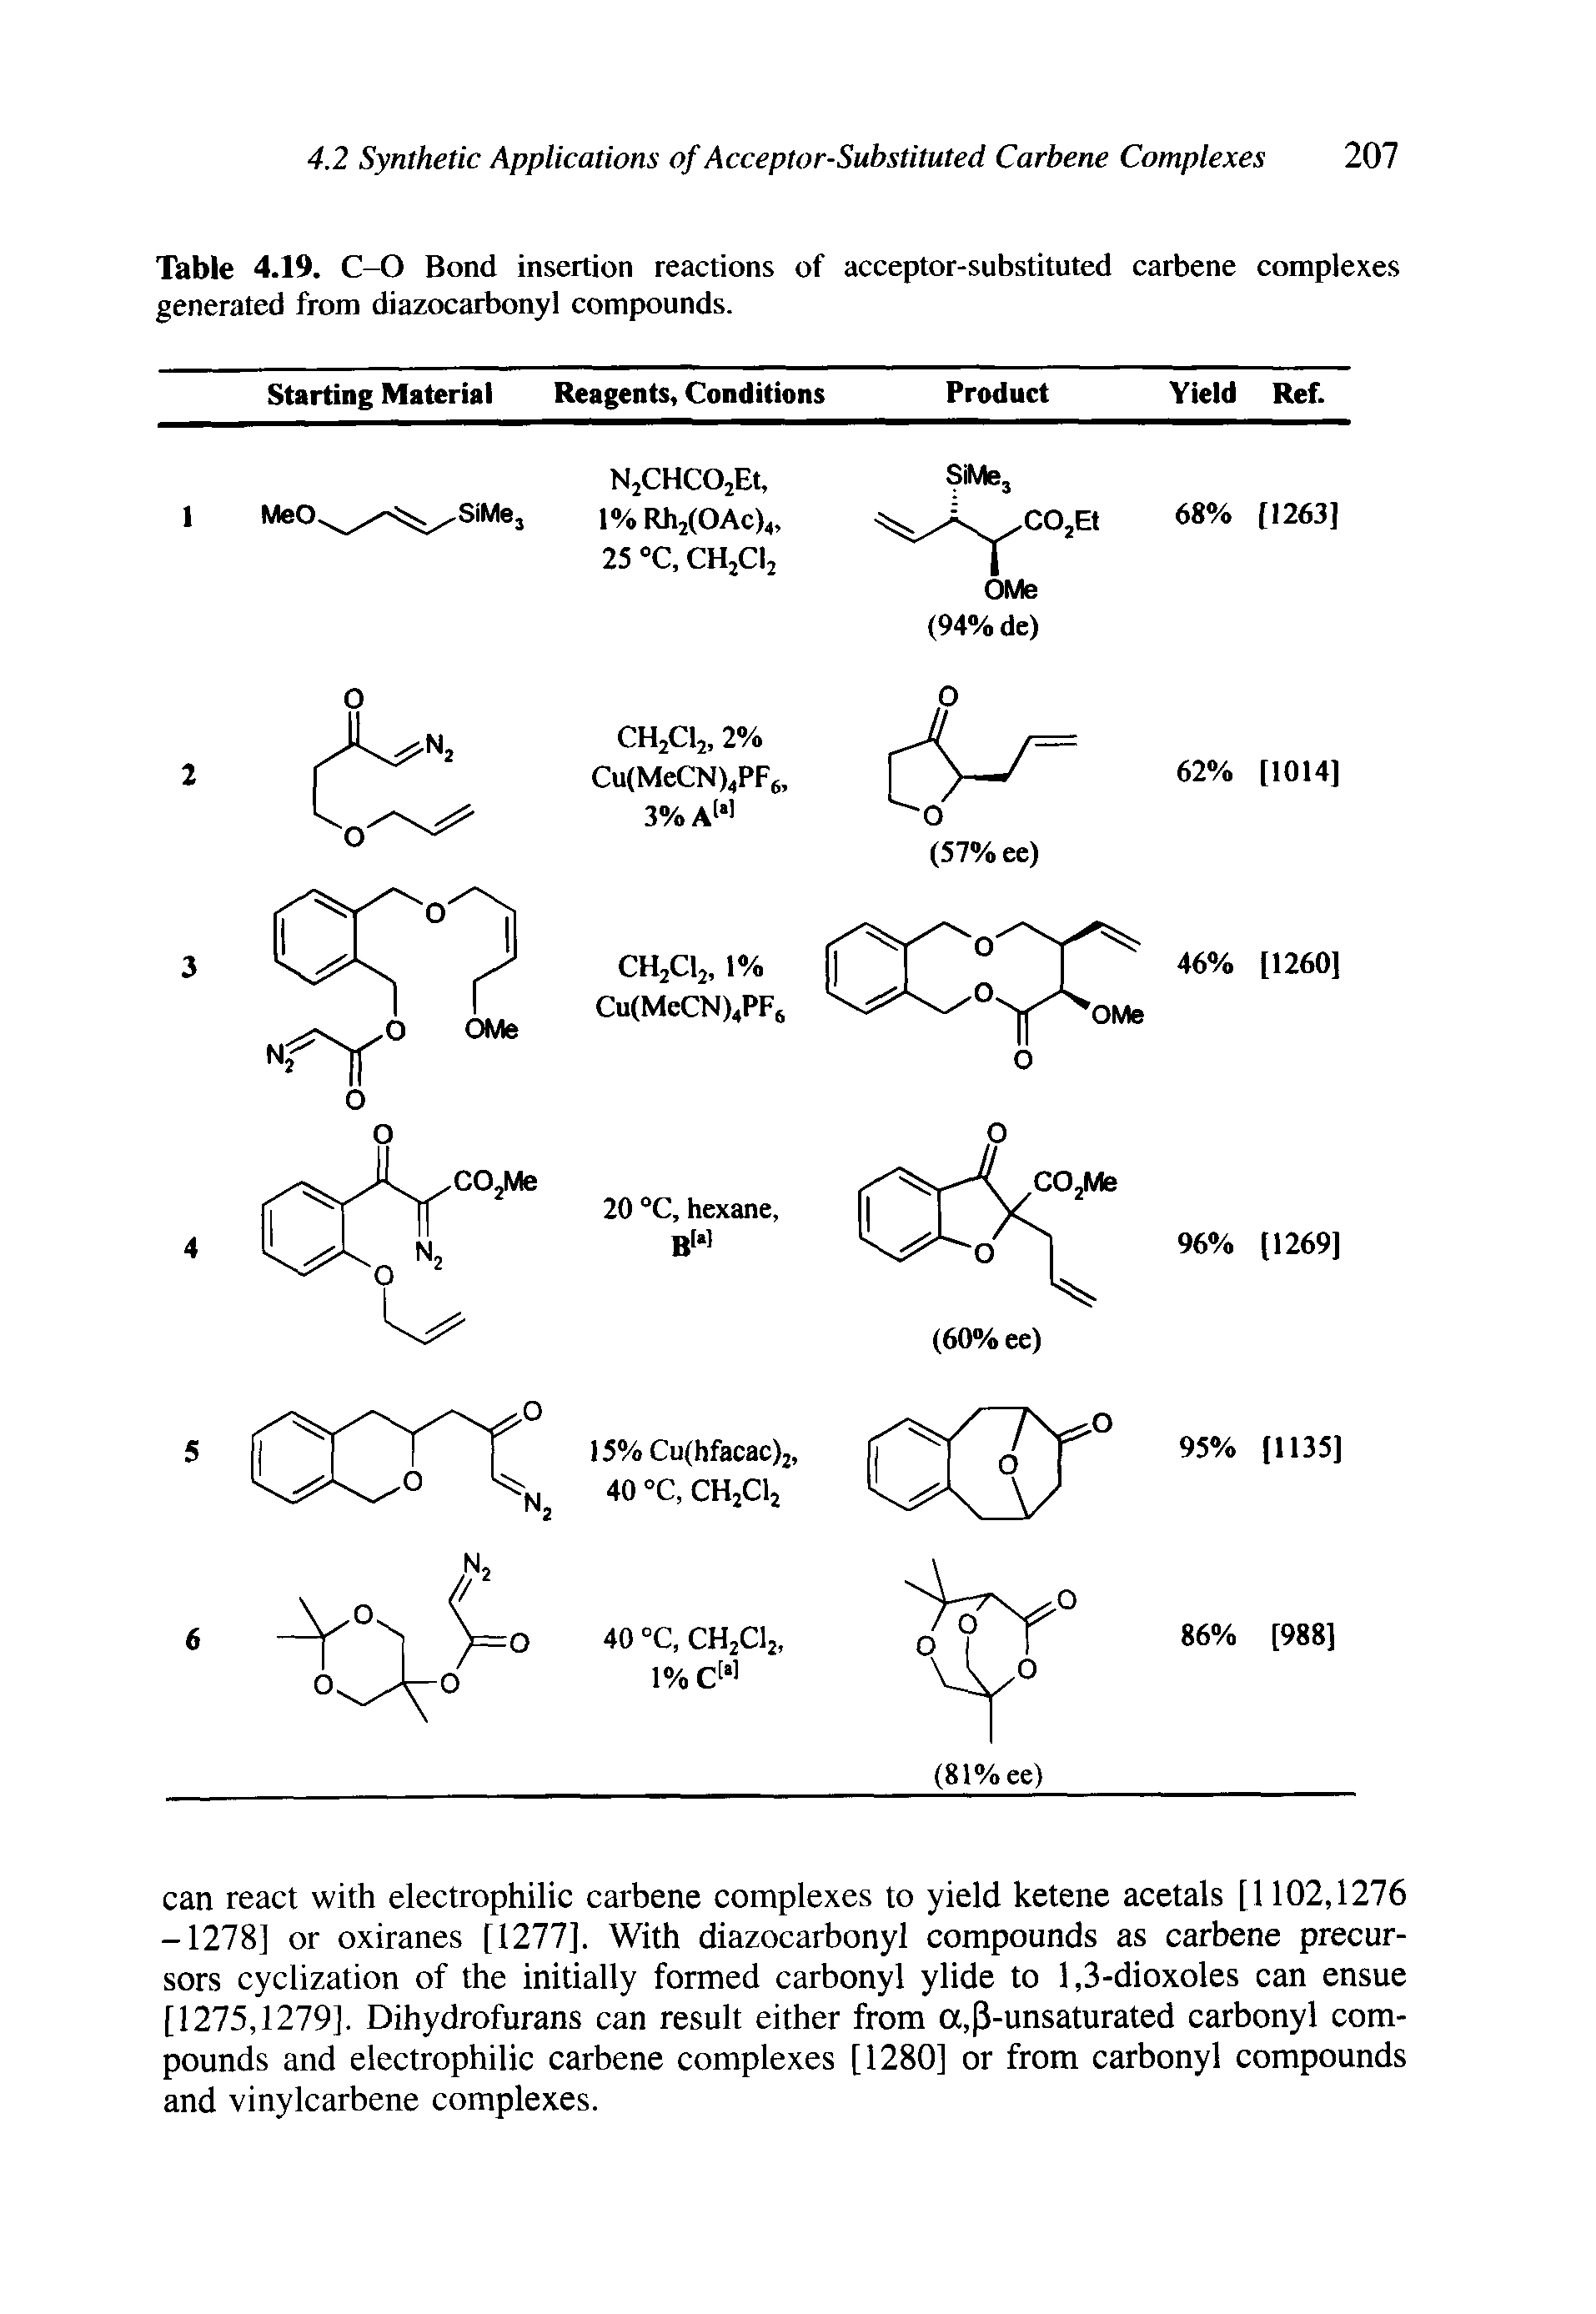 Table 4.19. C-O Bond insertion reactions of acceptor-substituted carbene eomplexes generated from diazocarbonyl compounds.